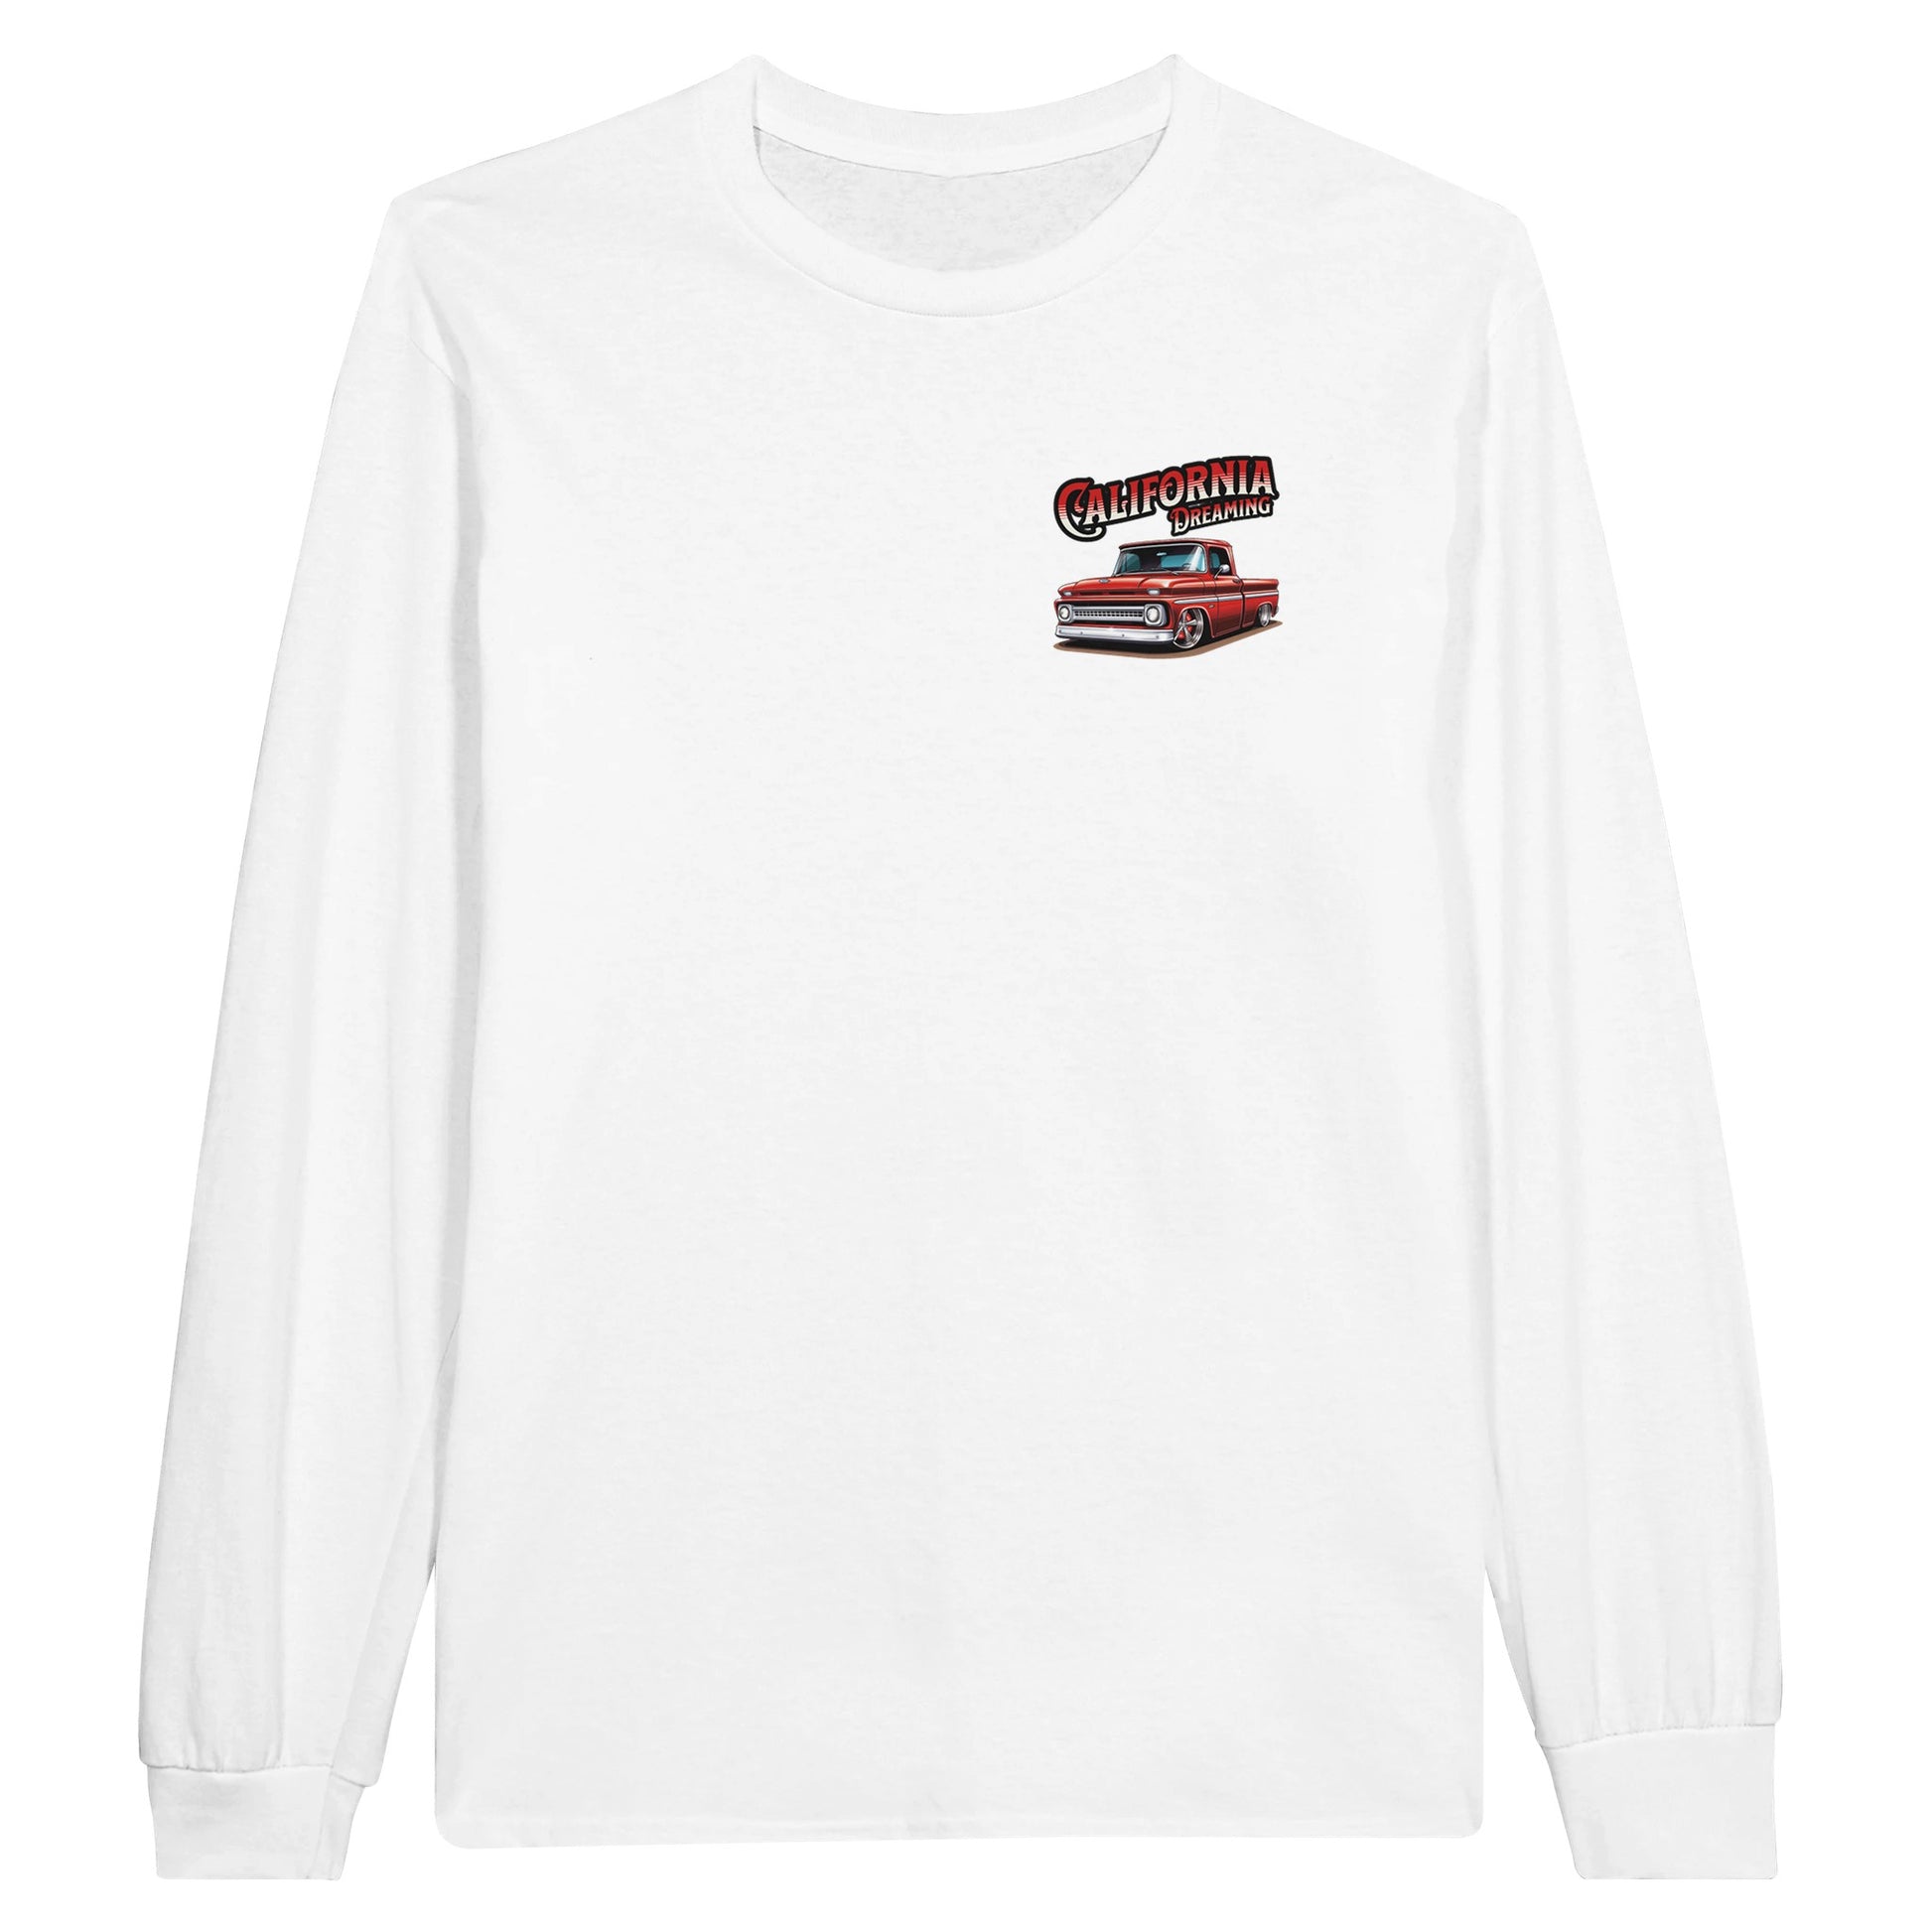 California Dreaming Chevy C-10 Long Sleeve T-shirt - Mister Snarky's